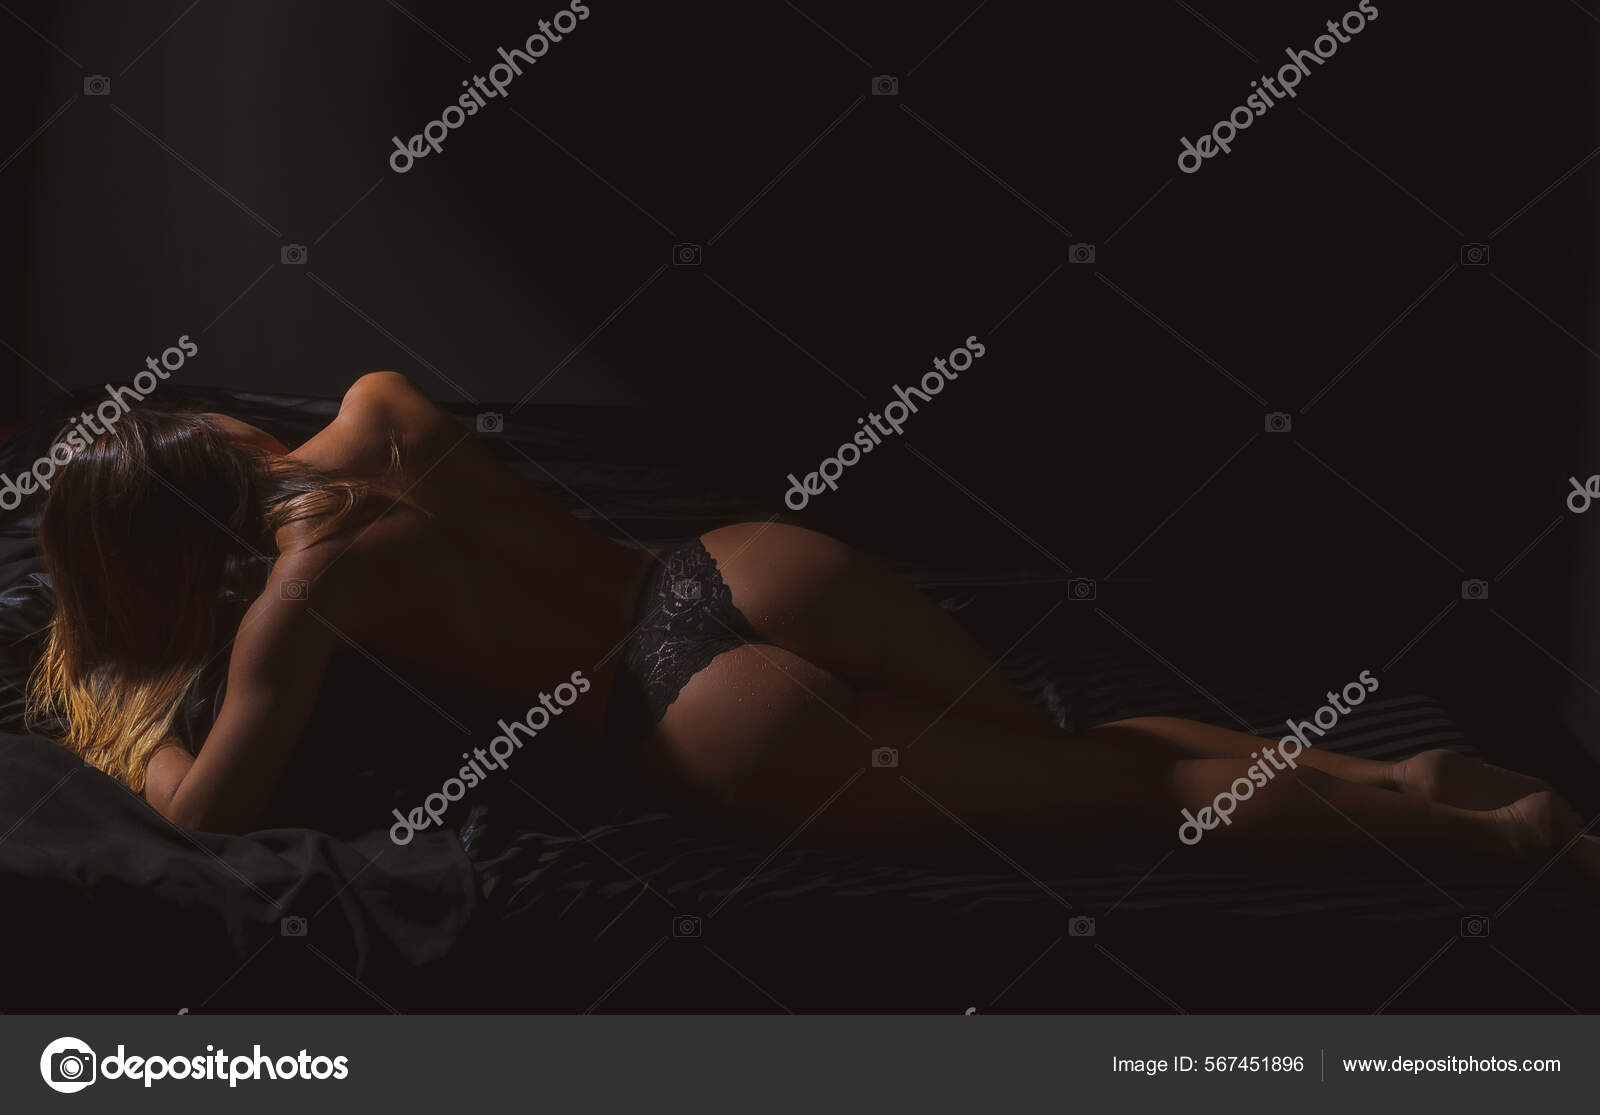 Escort service. Desire concept. Naked woman on bed. Female buttocks. Sexy ass in black lingerie. Attractive female body. Erotic massage. Perfect butt pic